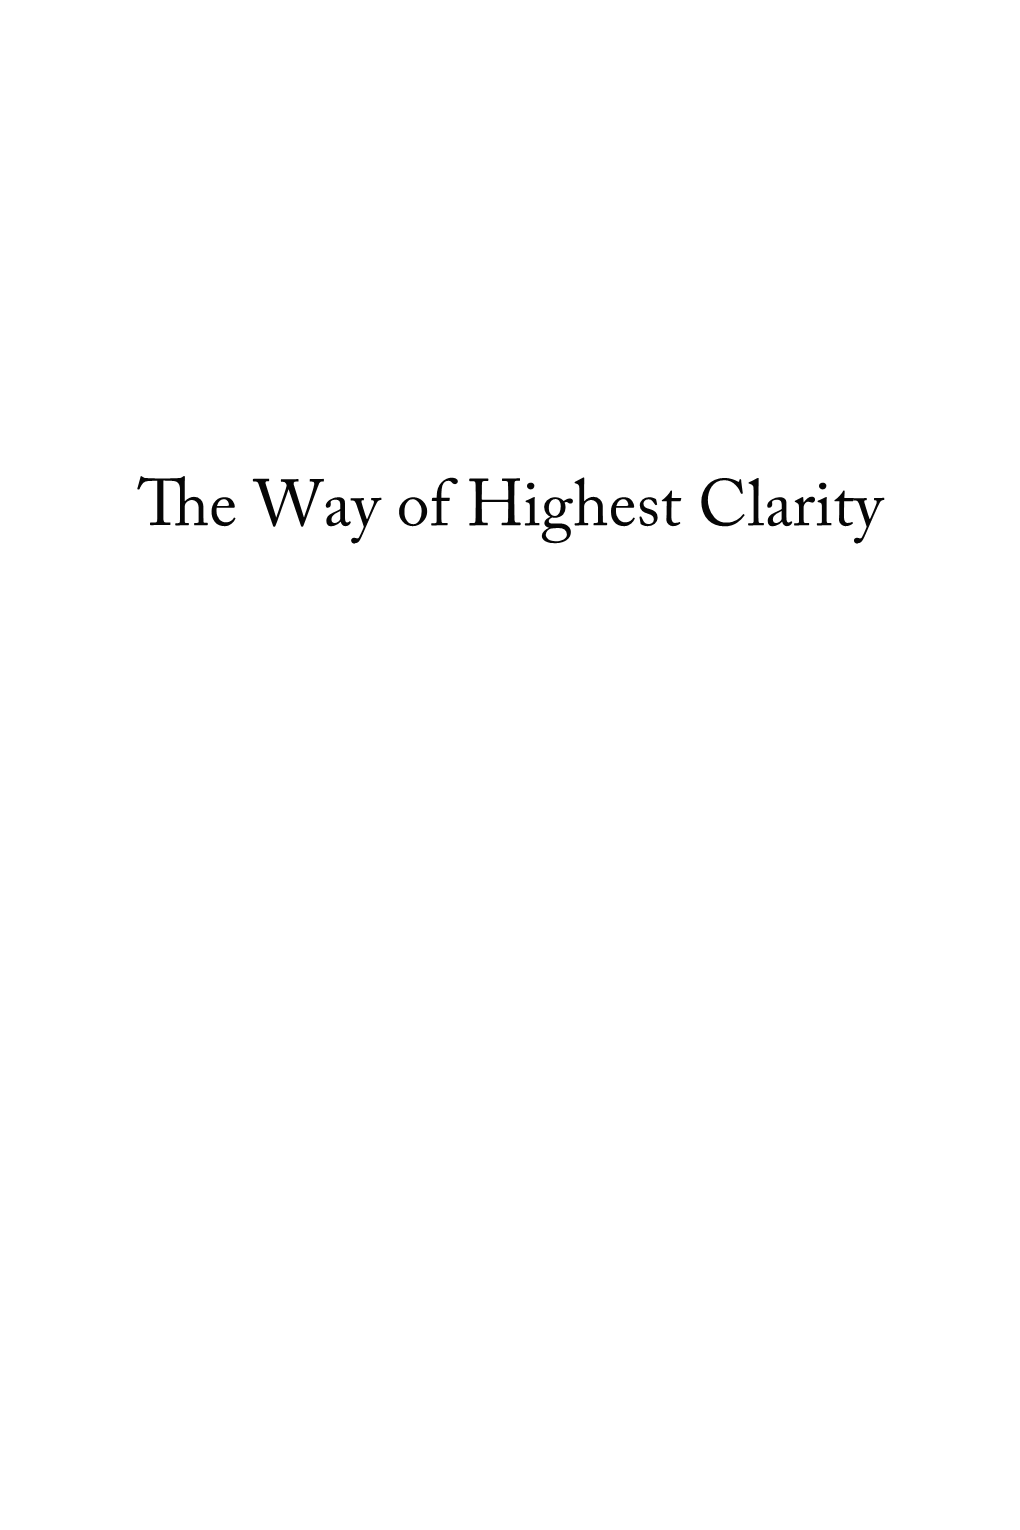 The Way of Highest Clarity